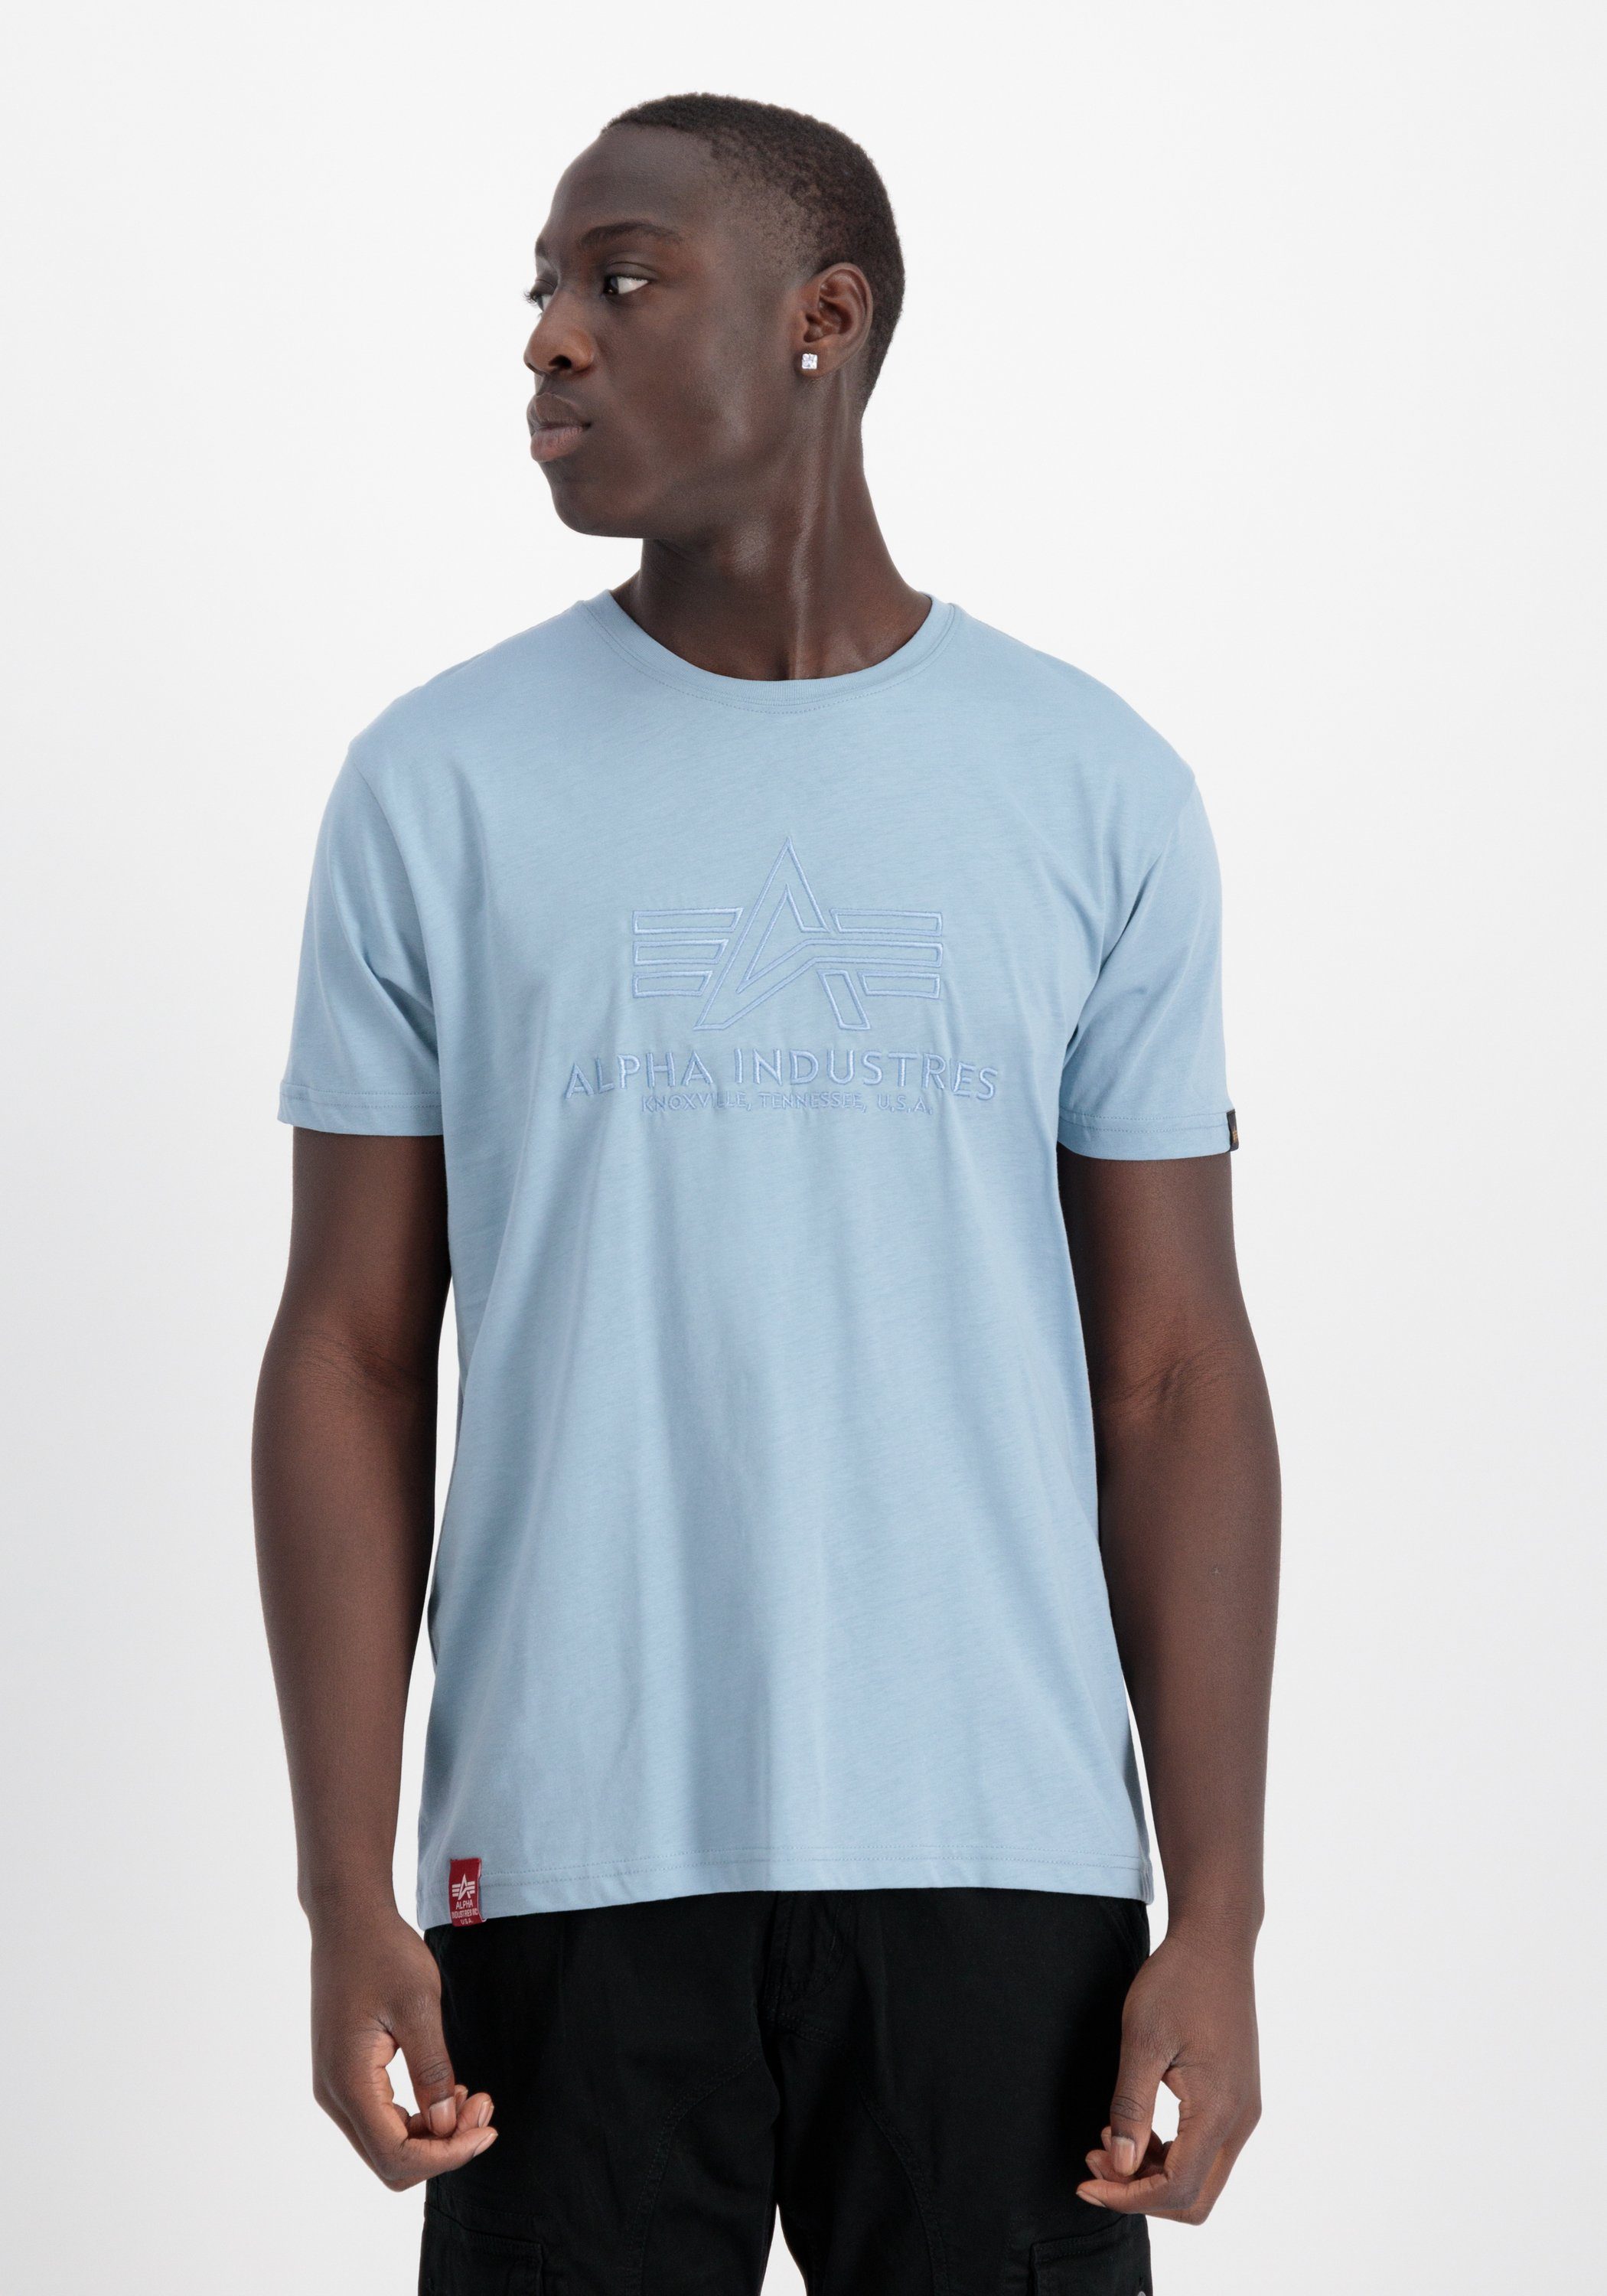 Alpha Industries T-shirt Men T-Shirts Basic T Embroidery